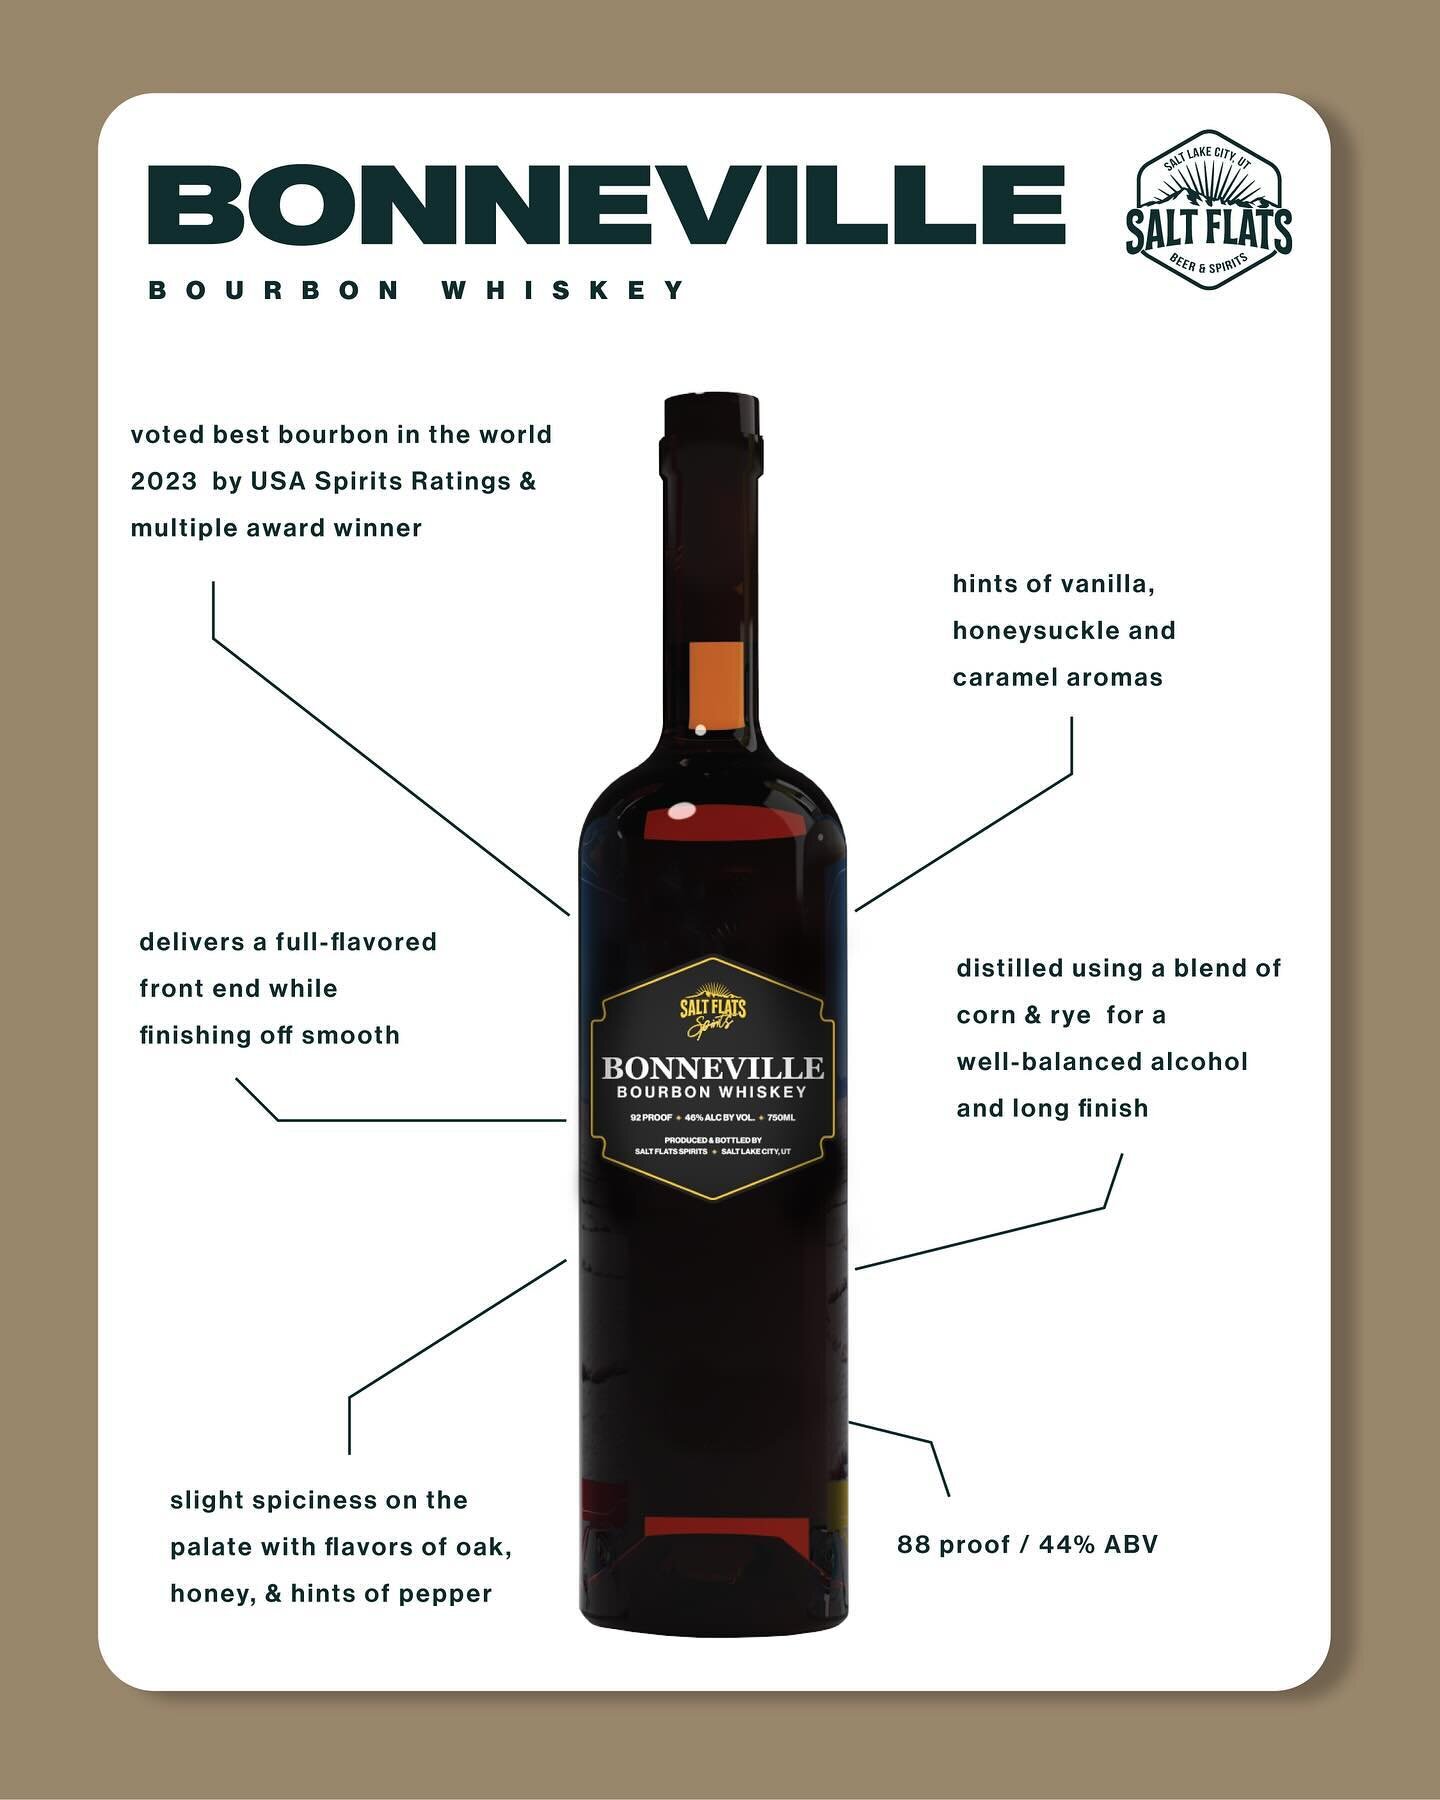 There&rsquo;s a reason why our Bonneville Bourbon won best bourbon in the world according to USA Spirits Ratings🥇 With aromas of honeysuckle on the nose, slight spiciness on the palate and flavors of vanilla, oak and honey, this bourbon has well bal